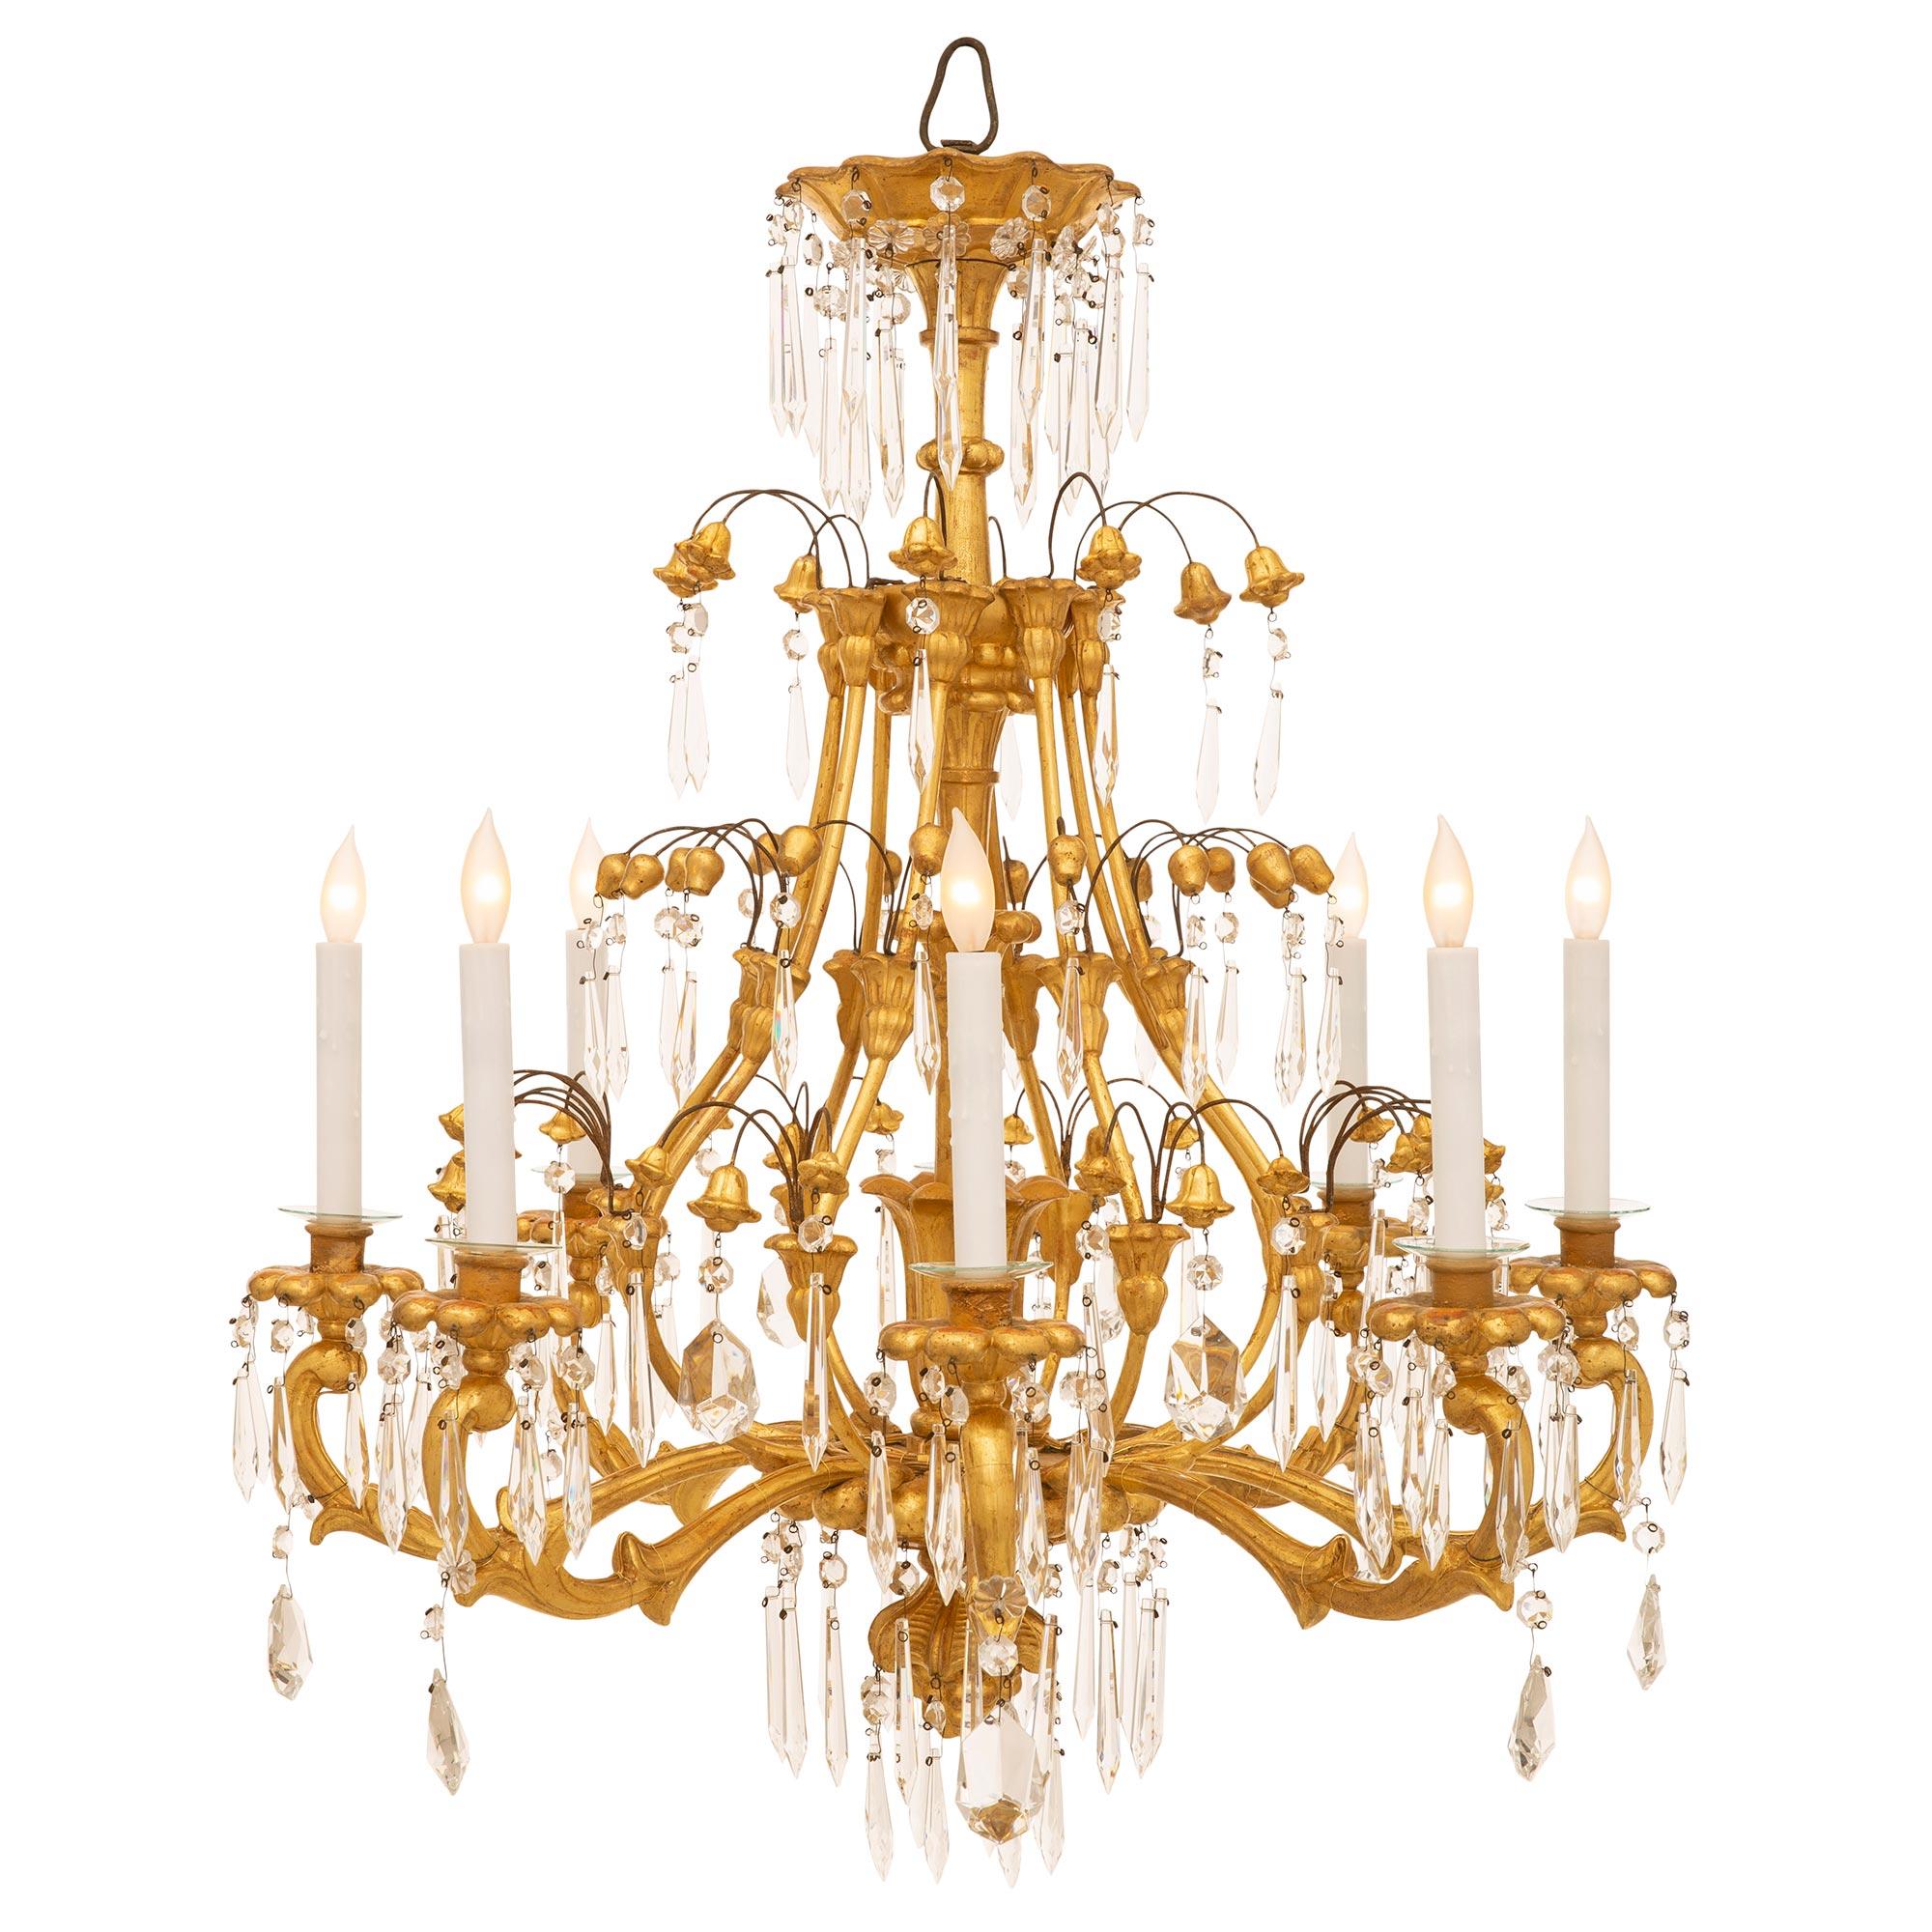 A beautiful and extremely decorative Italian 19th century Venetian st. giltwood and crystal chandelier. The eight arm chandelier is centered by lovely and most unique bottom foliate finial with prism cut crystal pendants and fine reeded designs.